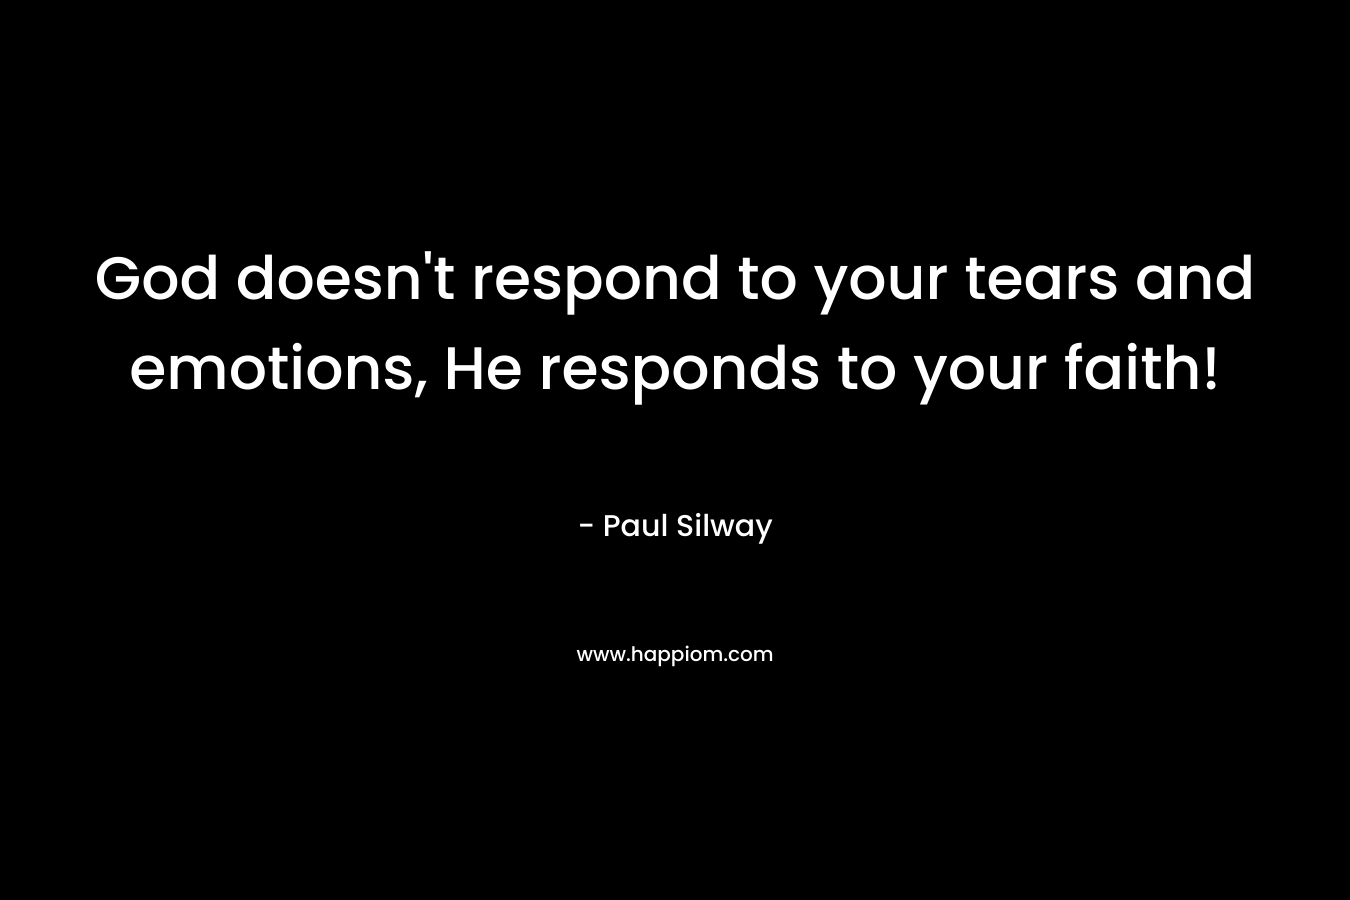 God doesn’t respond to your tears and emotions, He responds to your faith! – Paul Silway